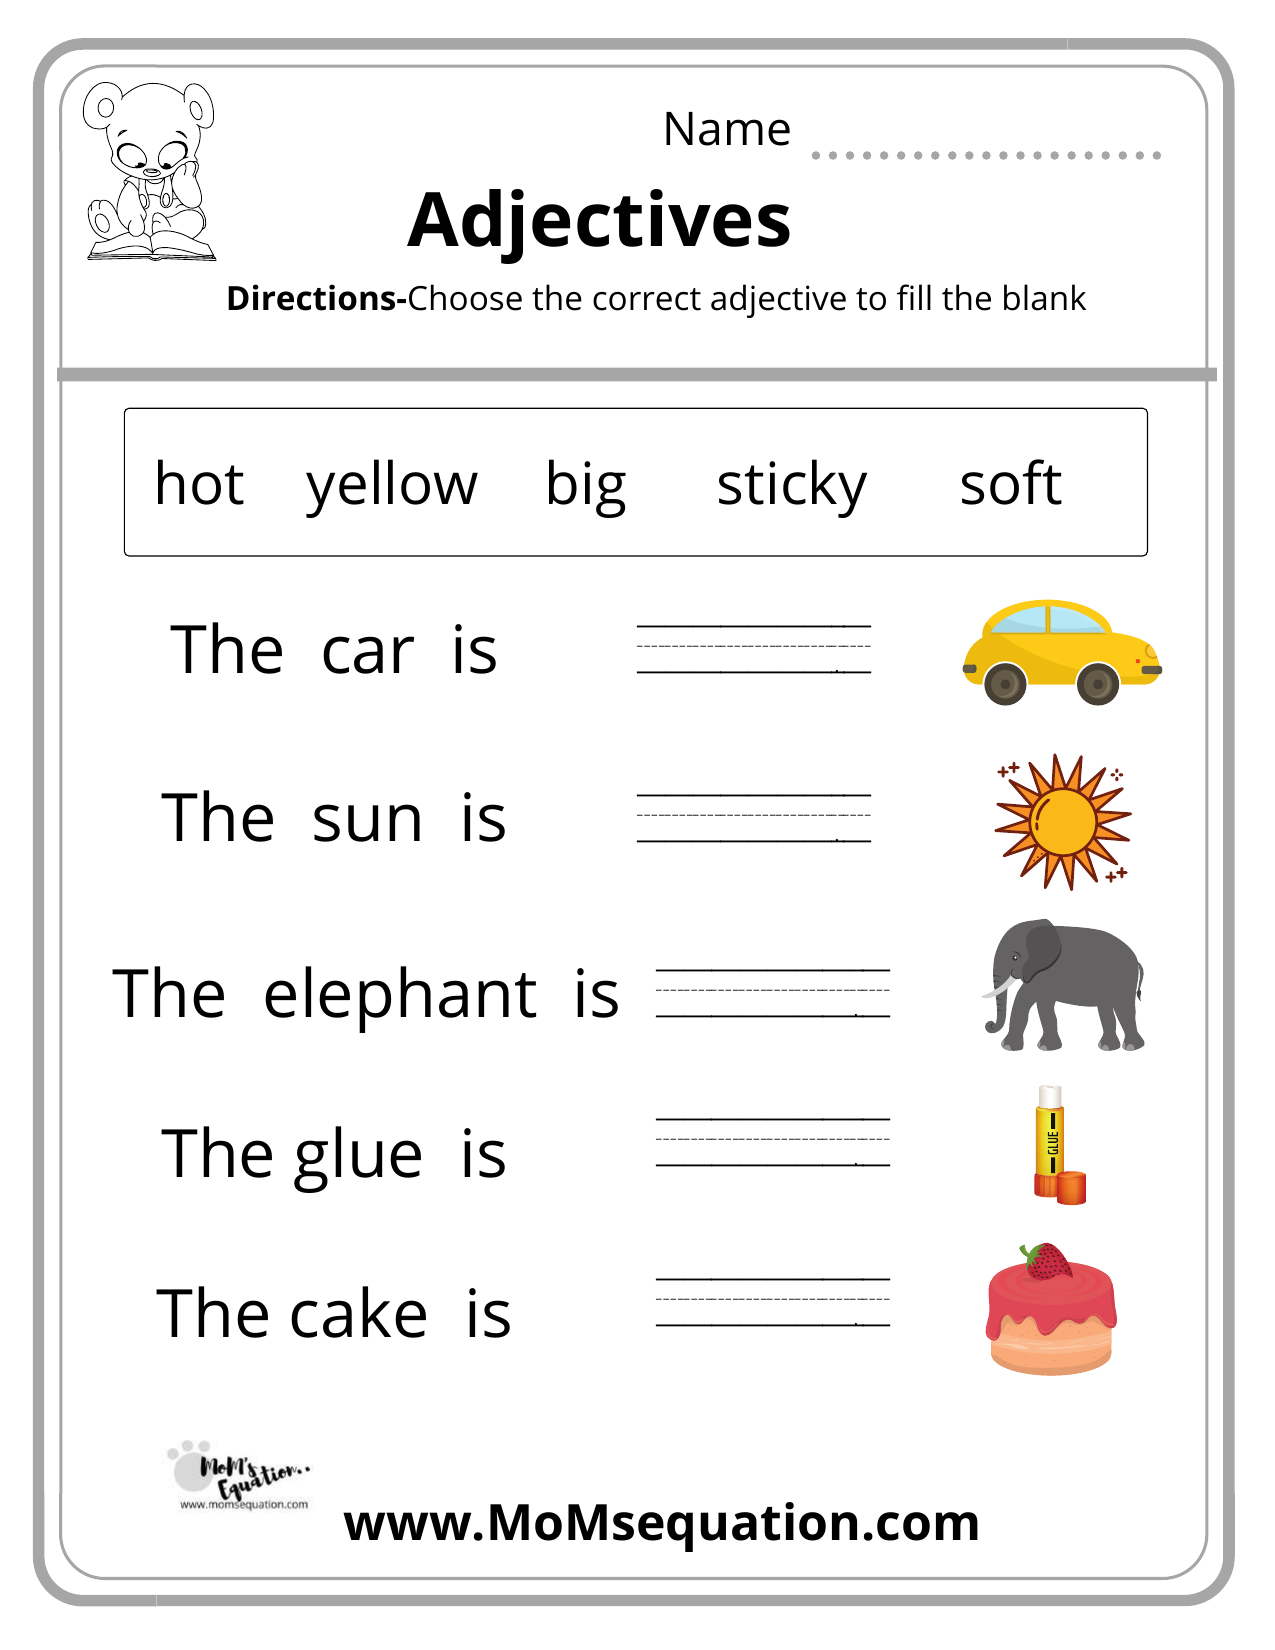 Worksheet About Adjective For Kids